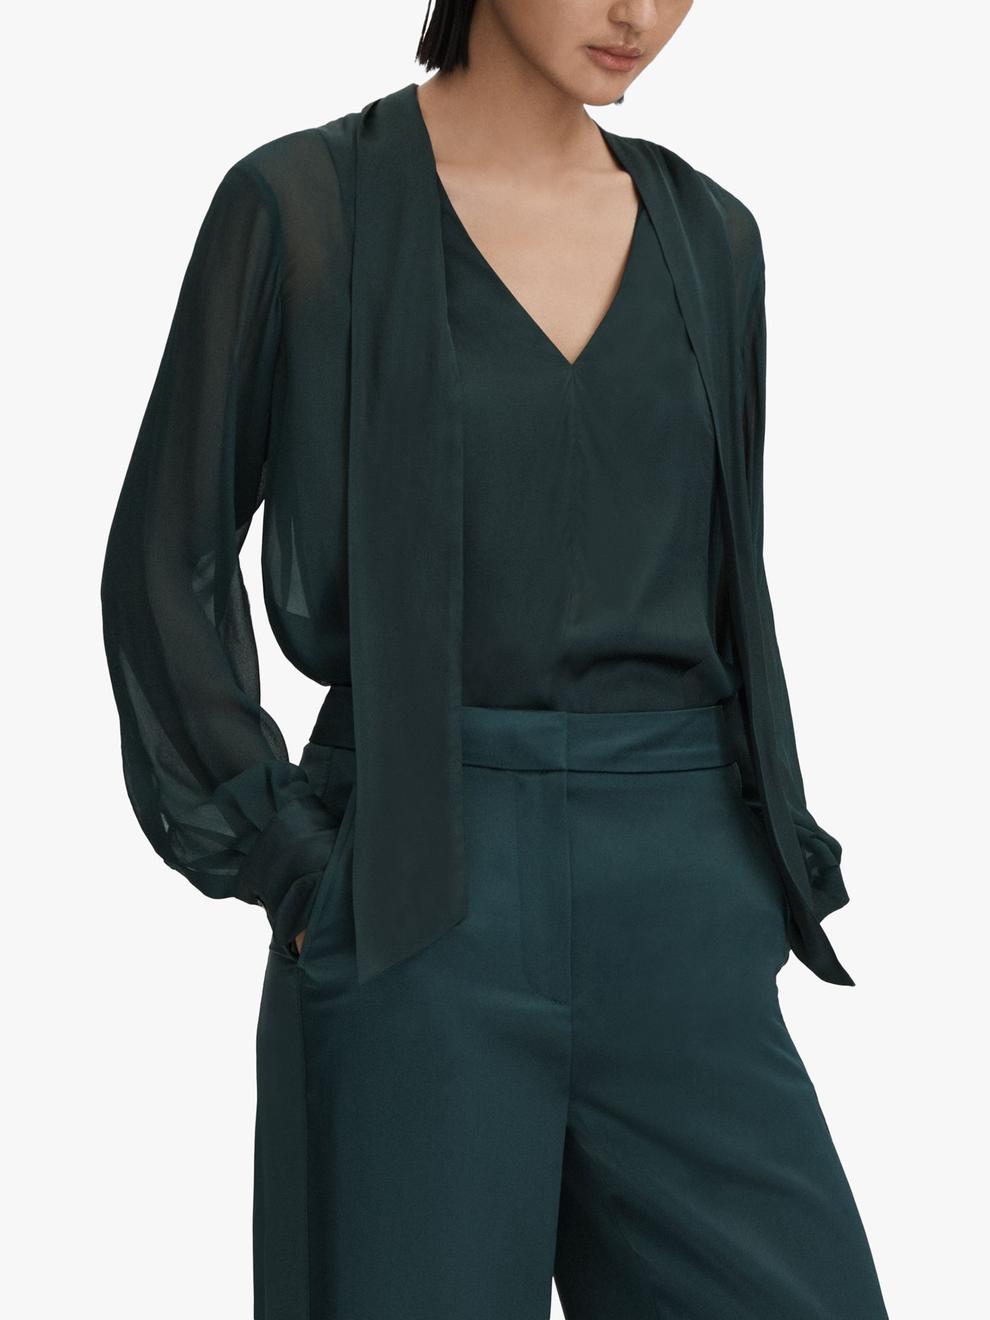 Reiss Lula Satin Tie Neck Blouse, Green offers at £88 in John Lewis